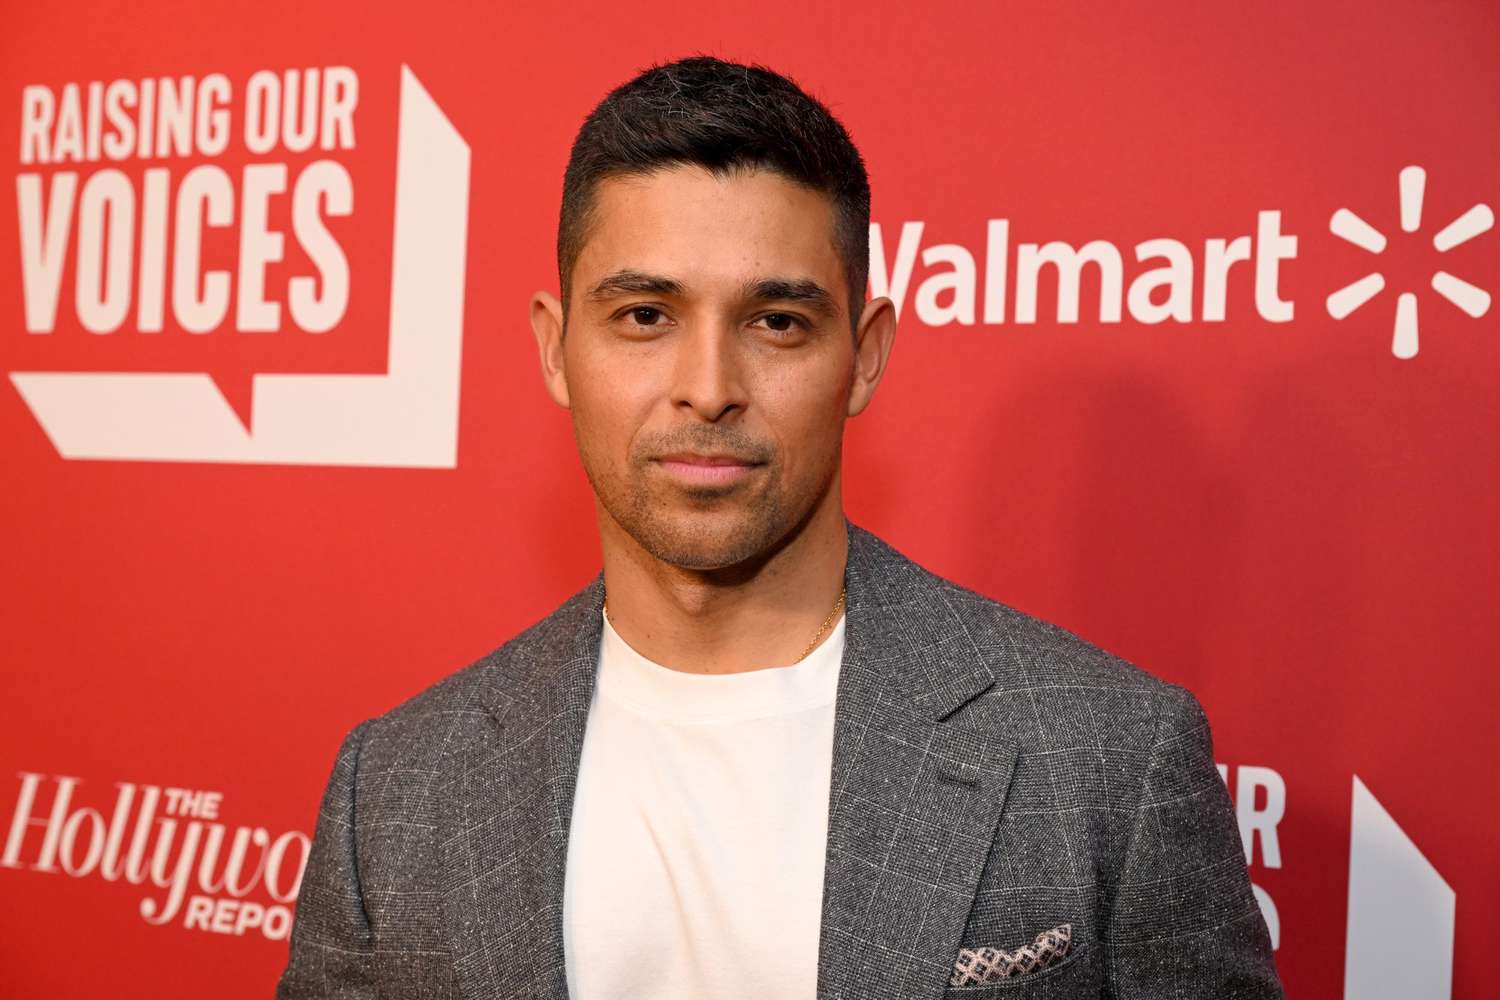 Wilmer Valderrama attends The Hollywood Reporter's Raising Our Voices, presented by Walmart, at The Maybourne Beverly Hills on April 20, 2022 in Beverly Hills, California.